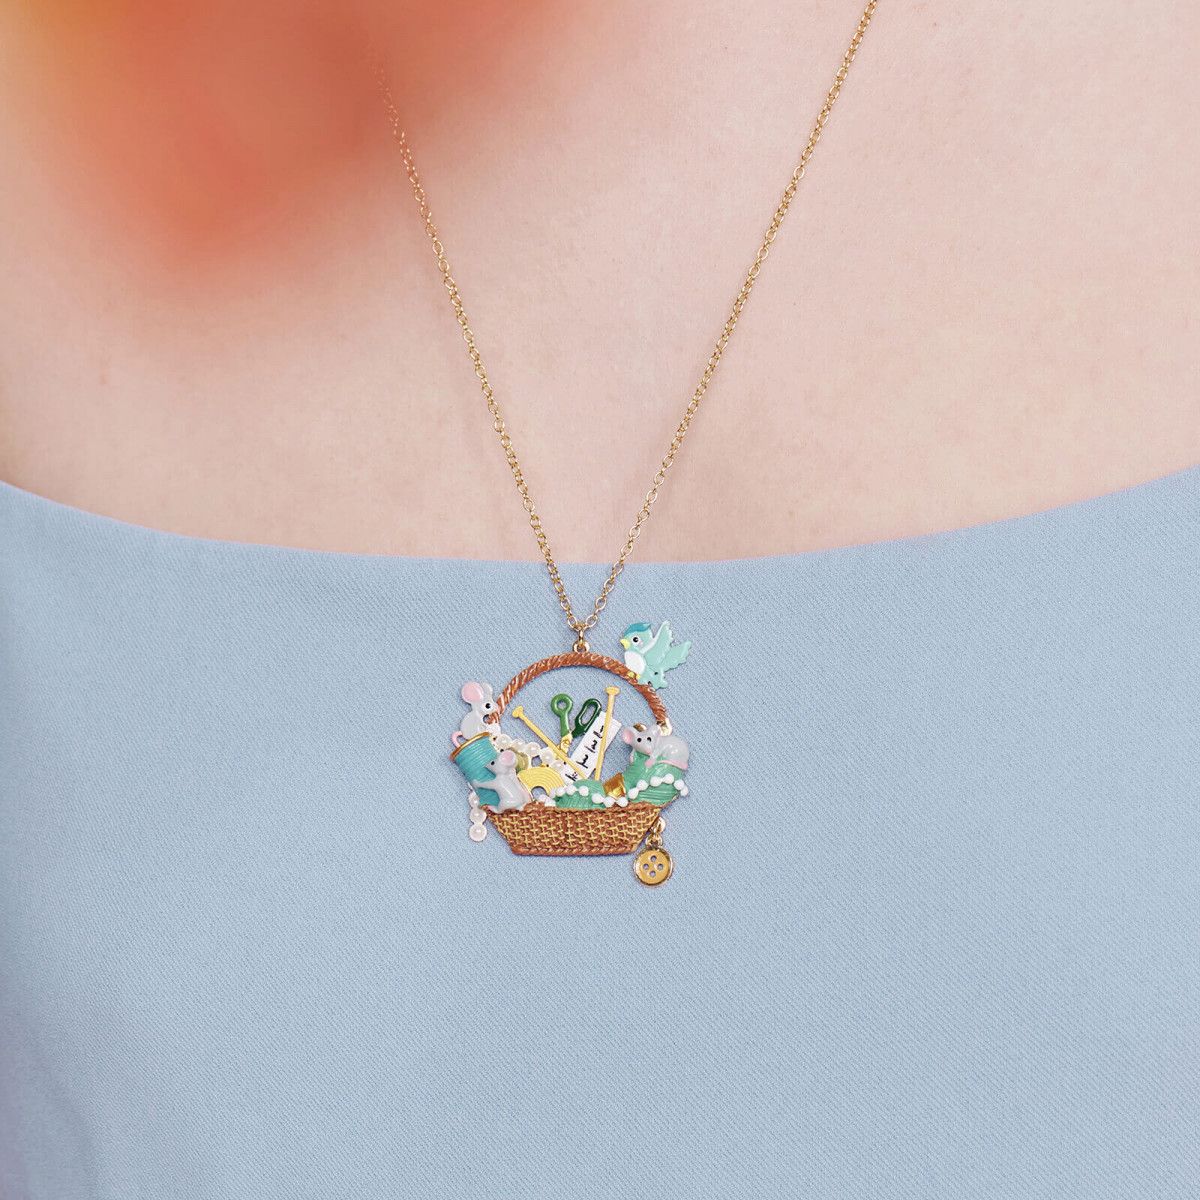 Sewing kit and animals pendant necklace - N2